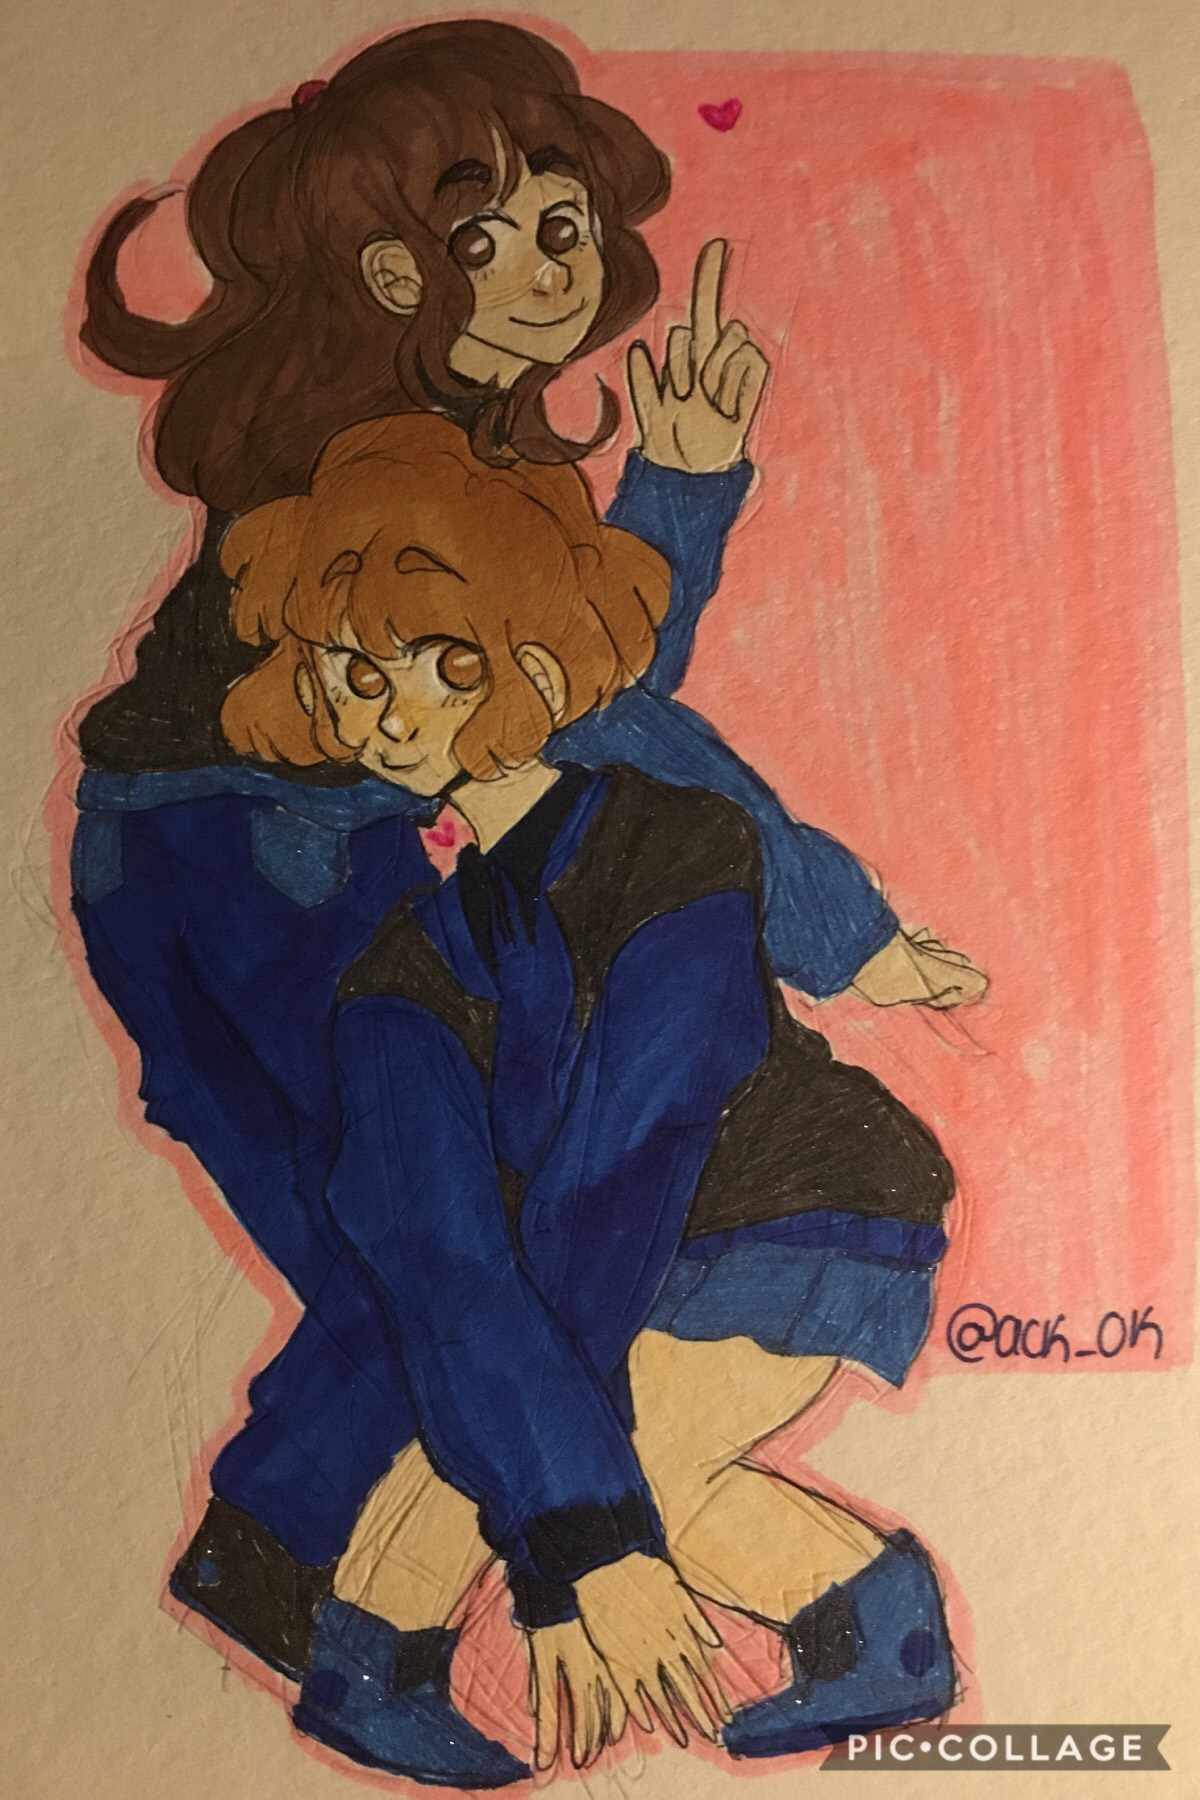 A drawing of me and my friend Karol being idiots ((imma hafta leave her soon and imma cry